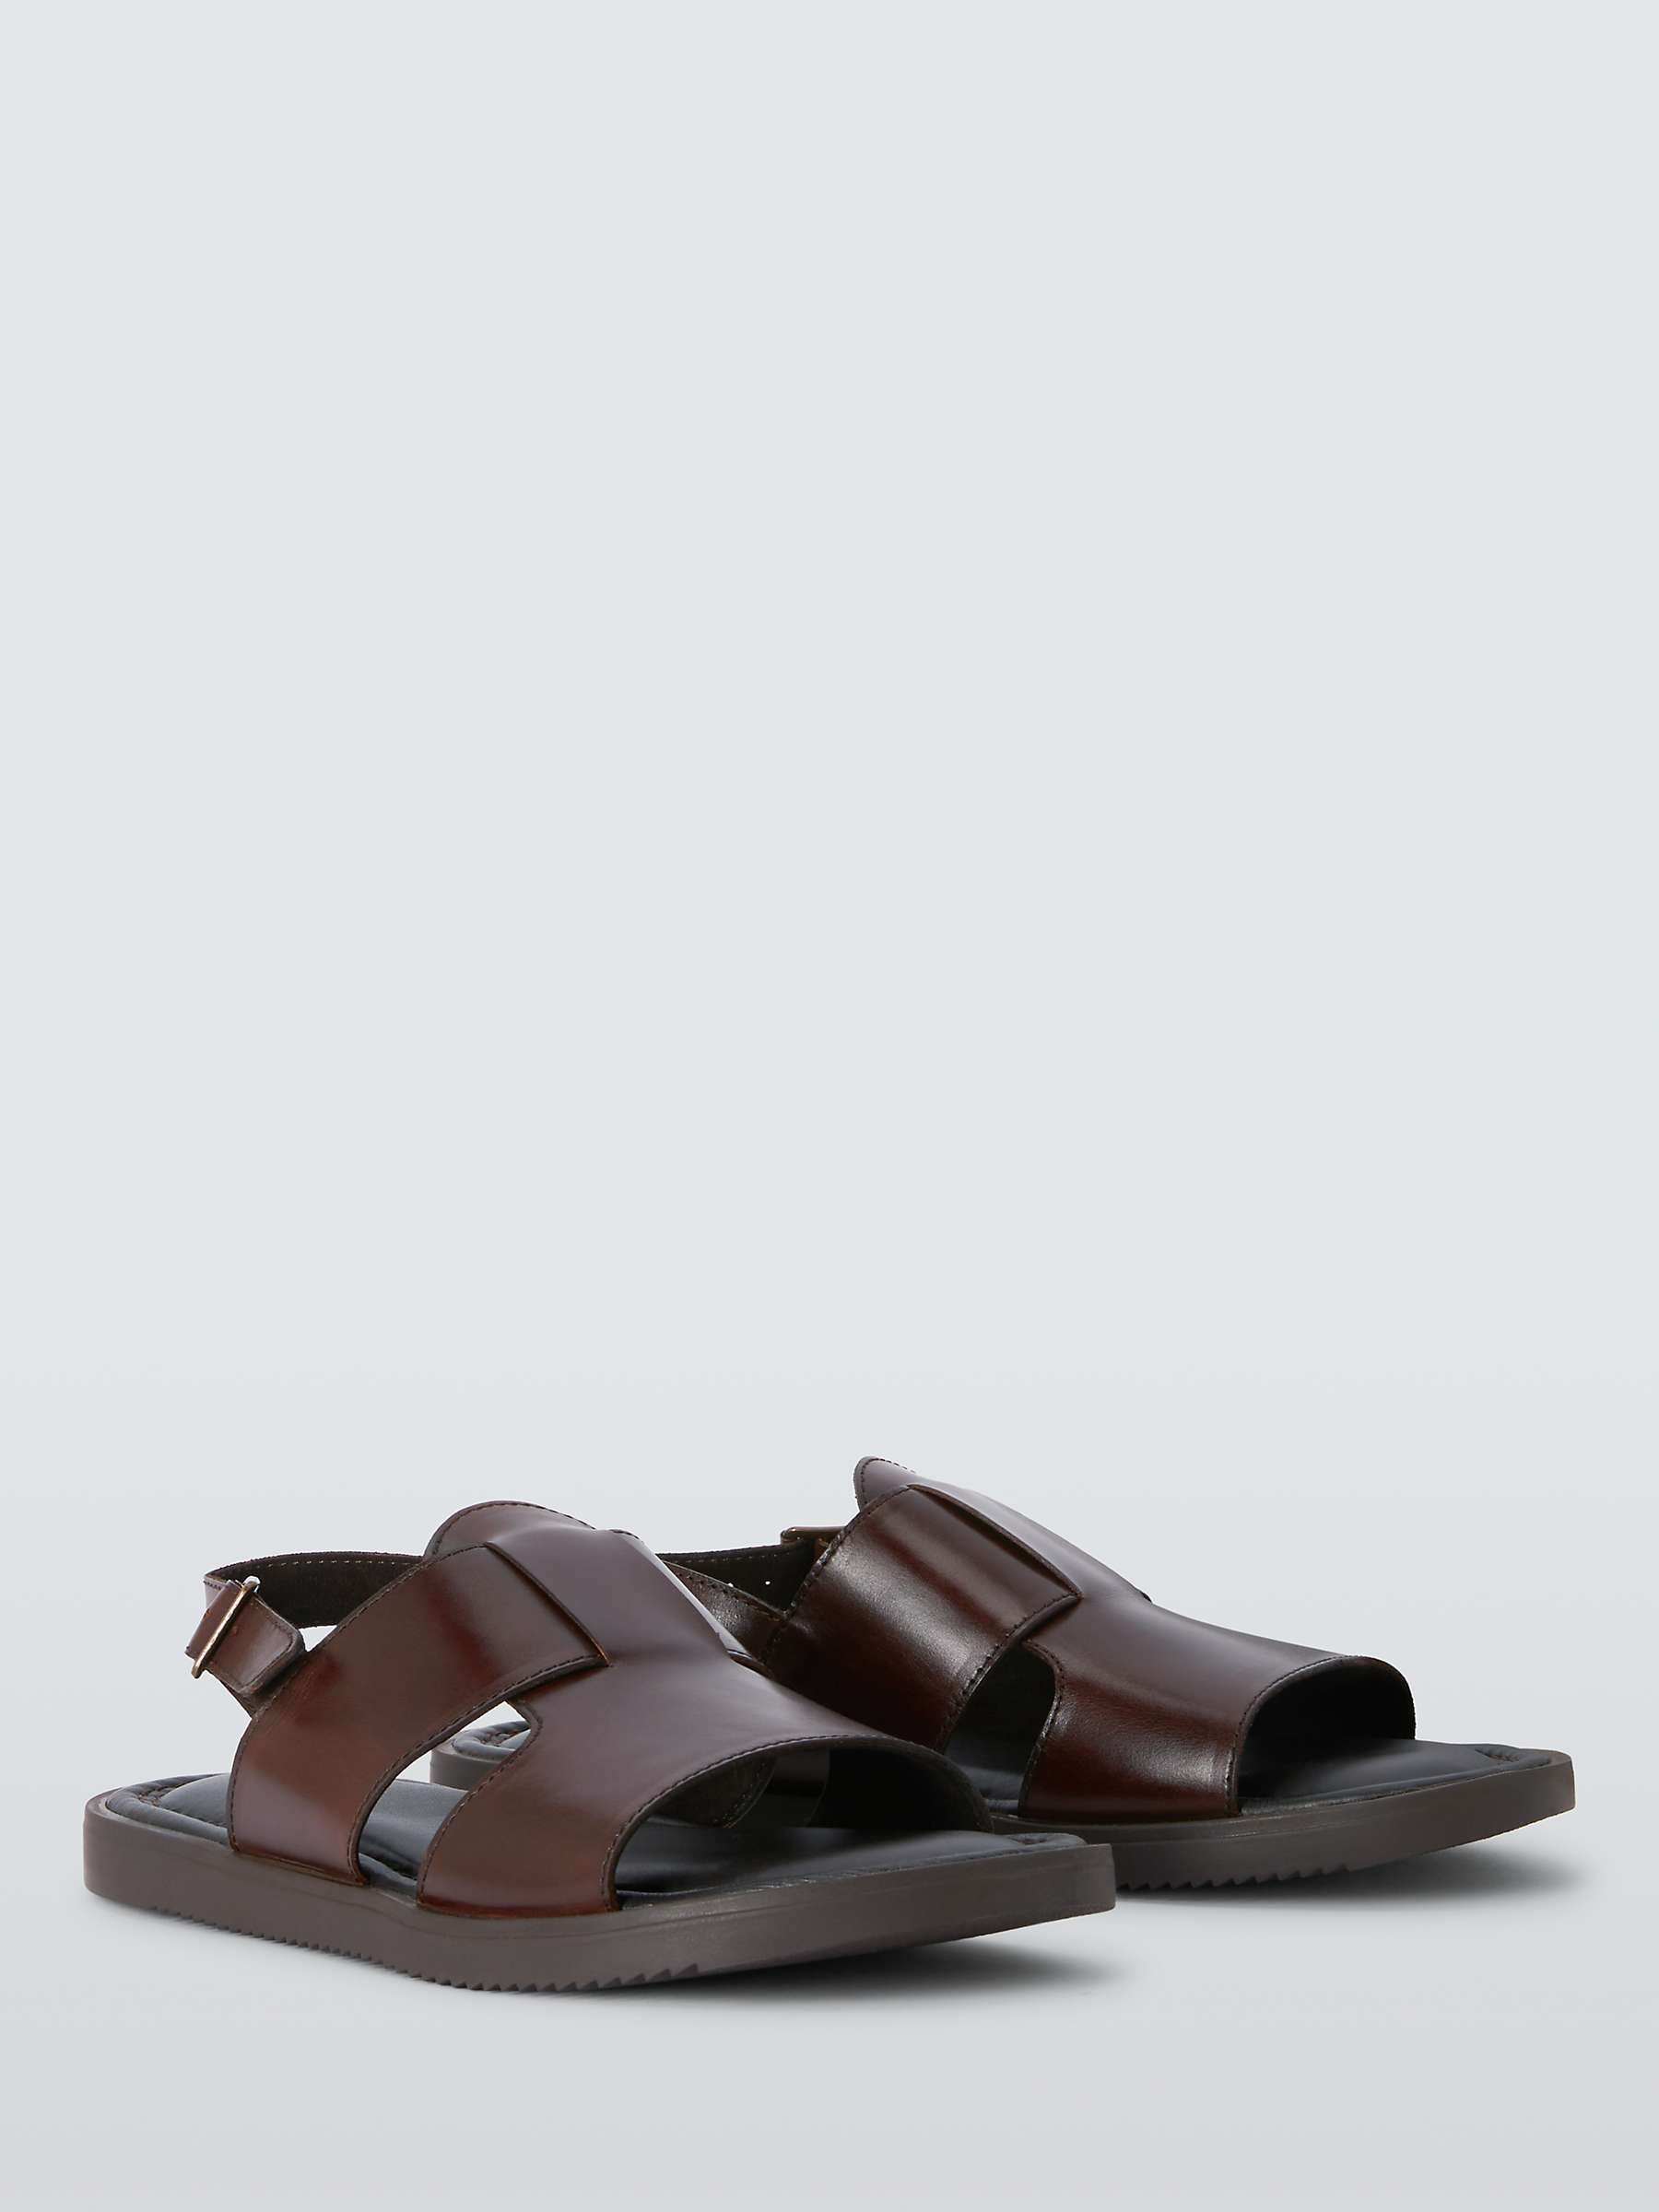 Buy John Lewis Leather Double Strap Sandals, Brown Online at johnlewis.com